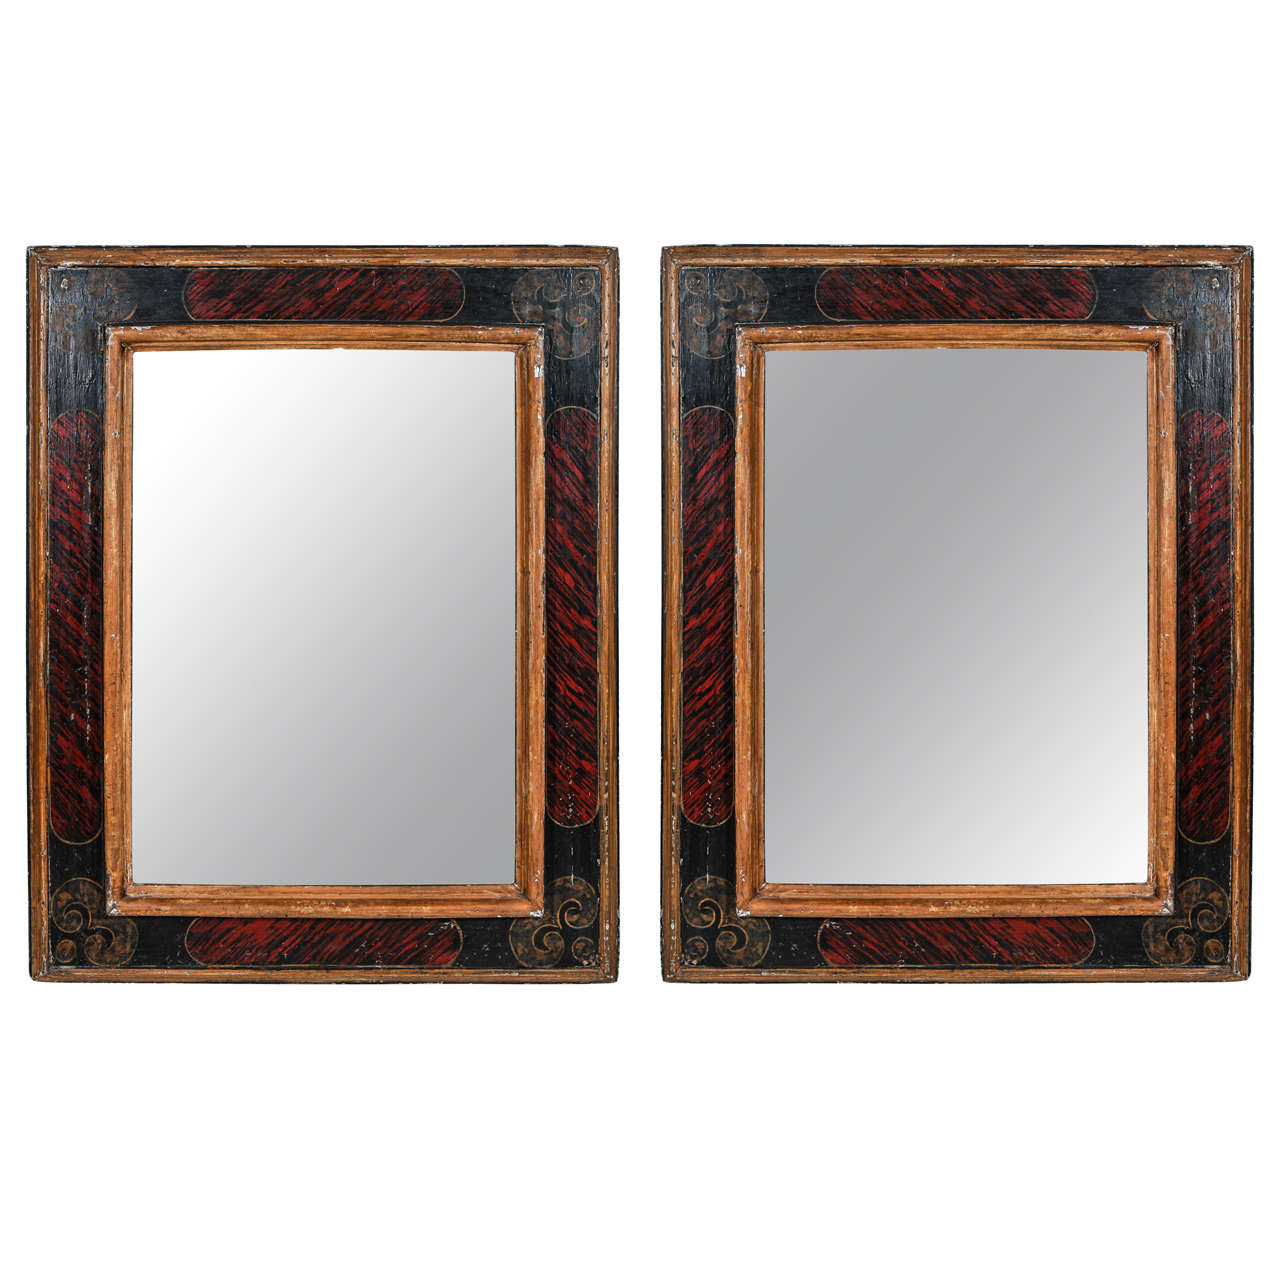 Tuscan Frames with Mercury Glass Mirrors